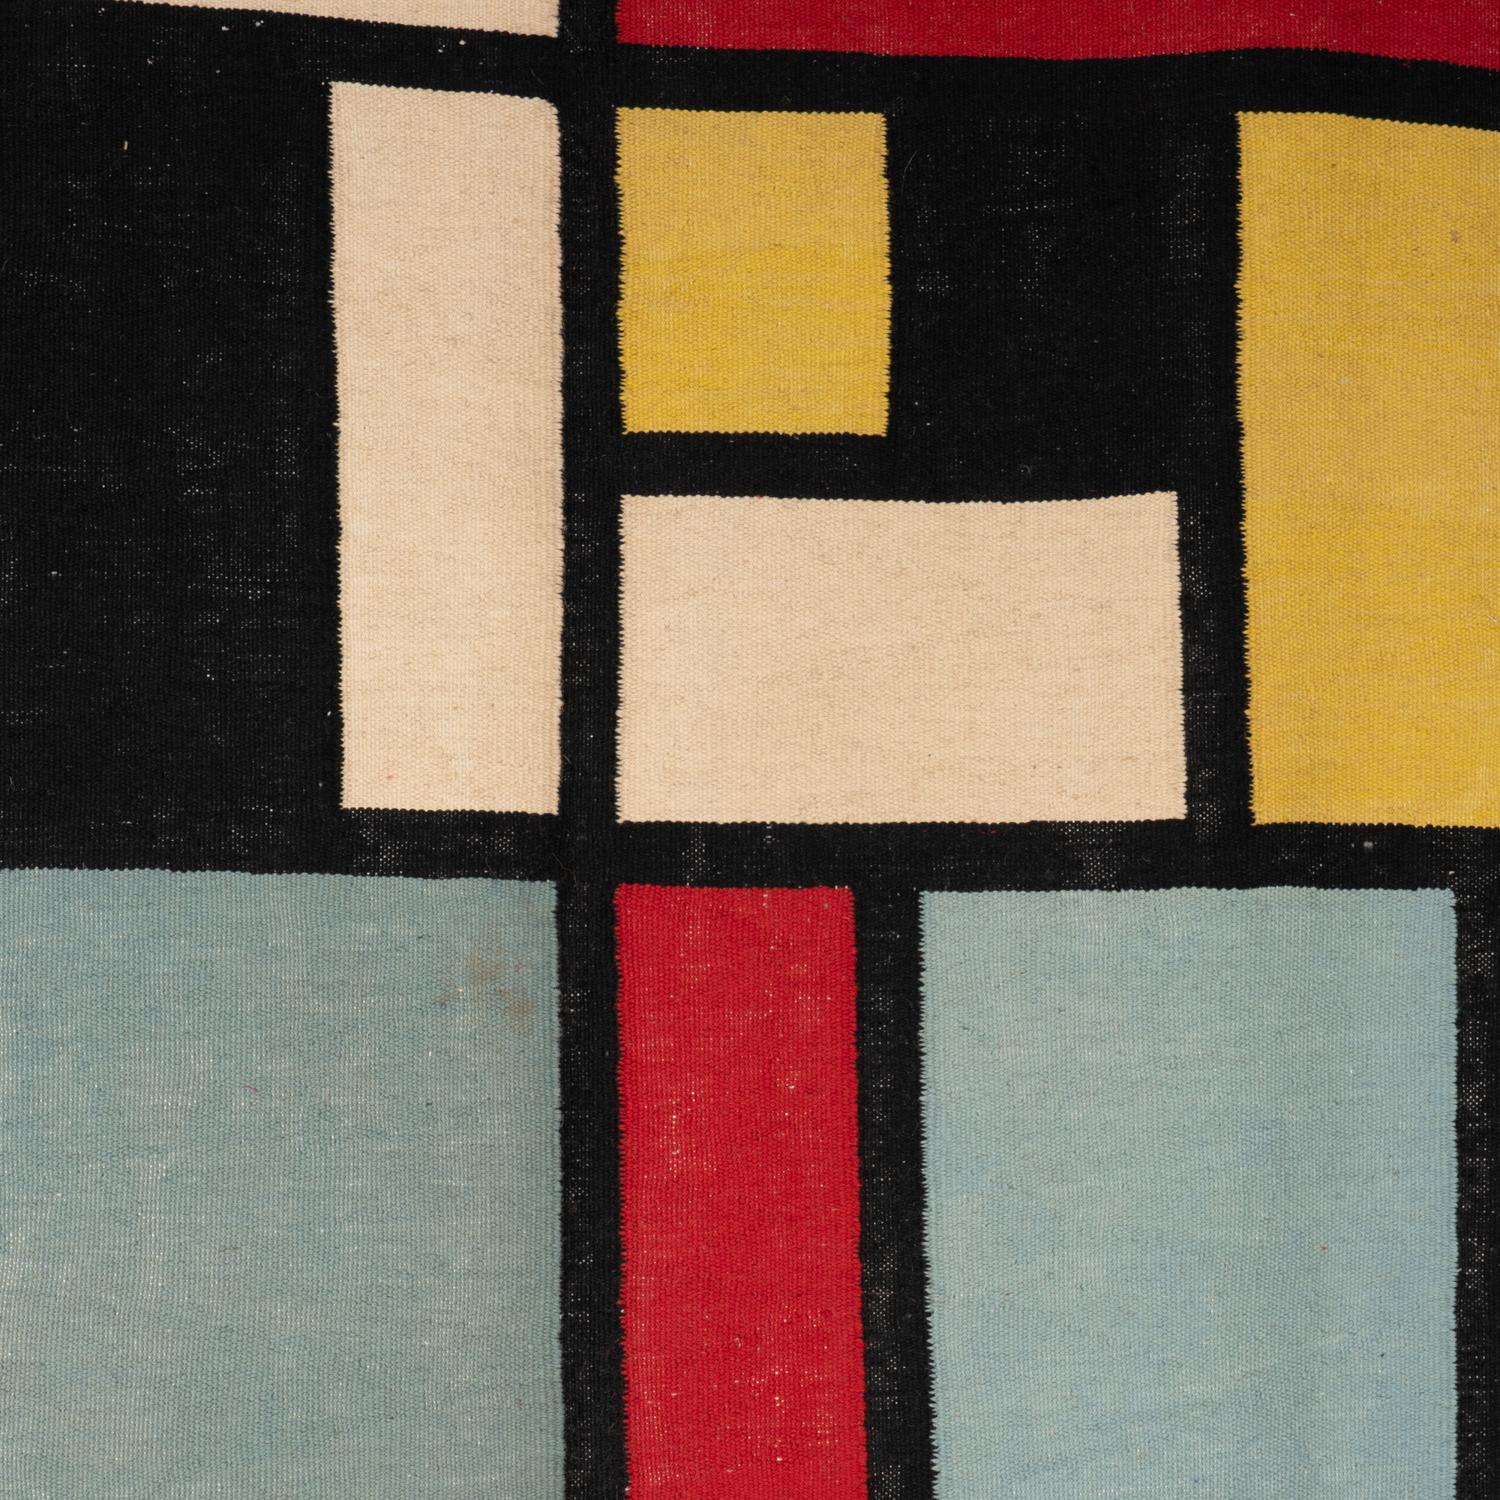 Rug, or tapestry, inspired by Piet Mondrian in shades of beige, yellow, black and blue. Hand-woven in Merino wool.

Contemporary work of craftsmen.

Numebered 1/8. Area : 3.74 square meters. Density : 523 600 knots.

Comes with a certificate signed